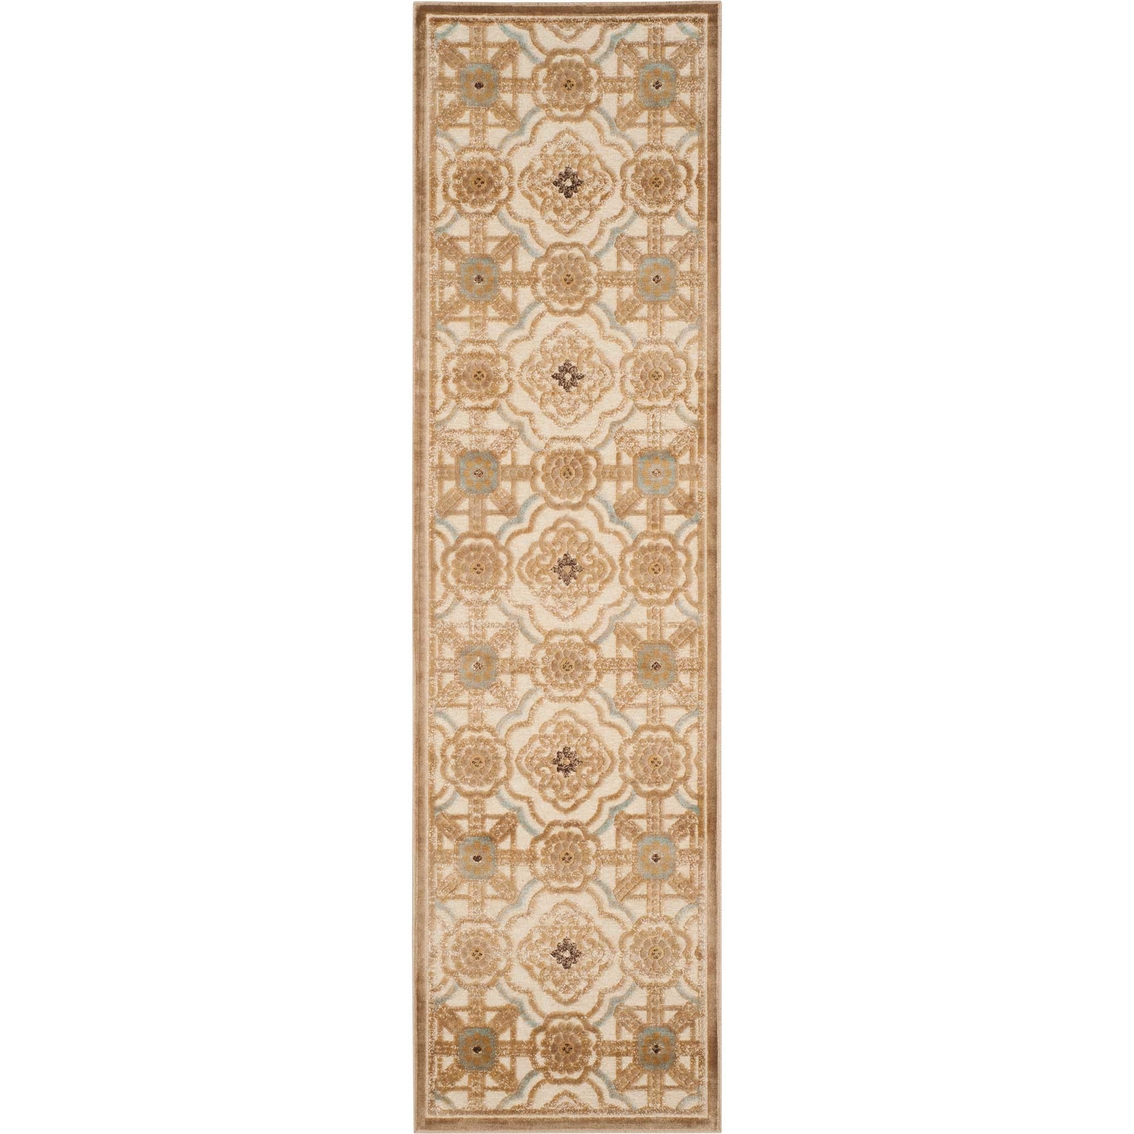 Martha Stewart Collection Imperial Palace Area Rug - Image 3 of 4